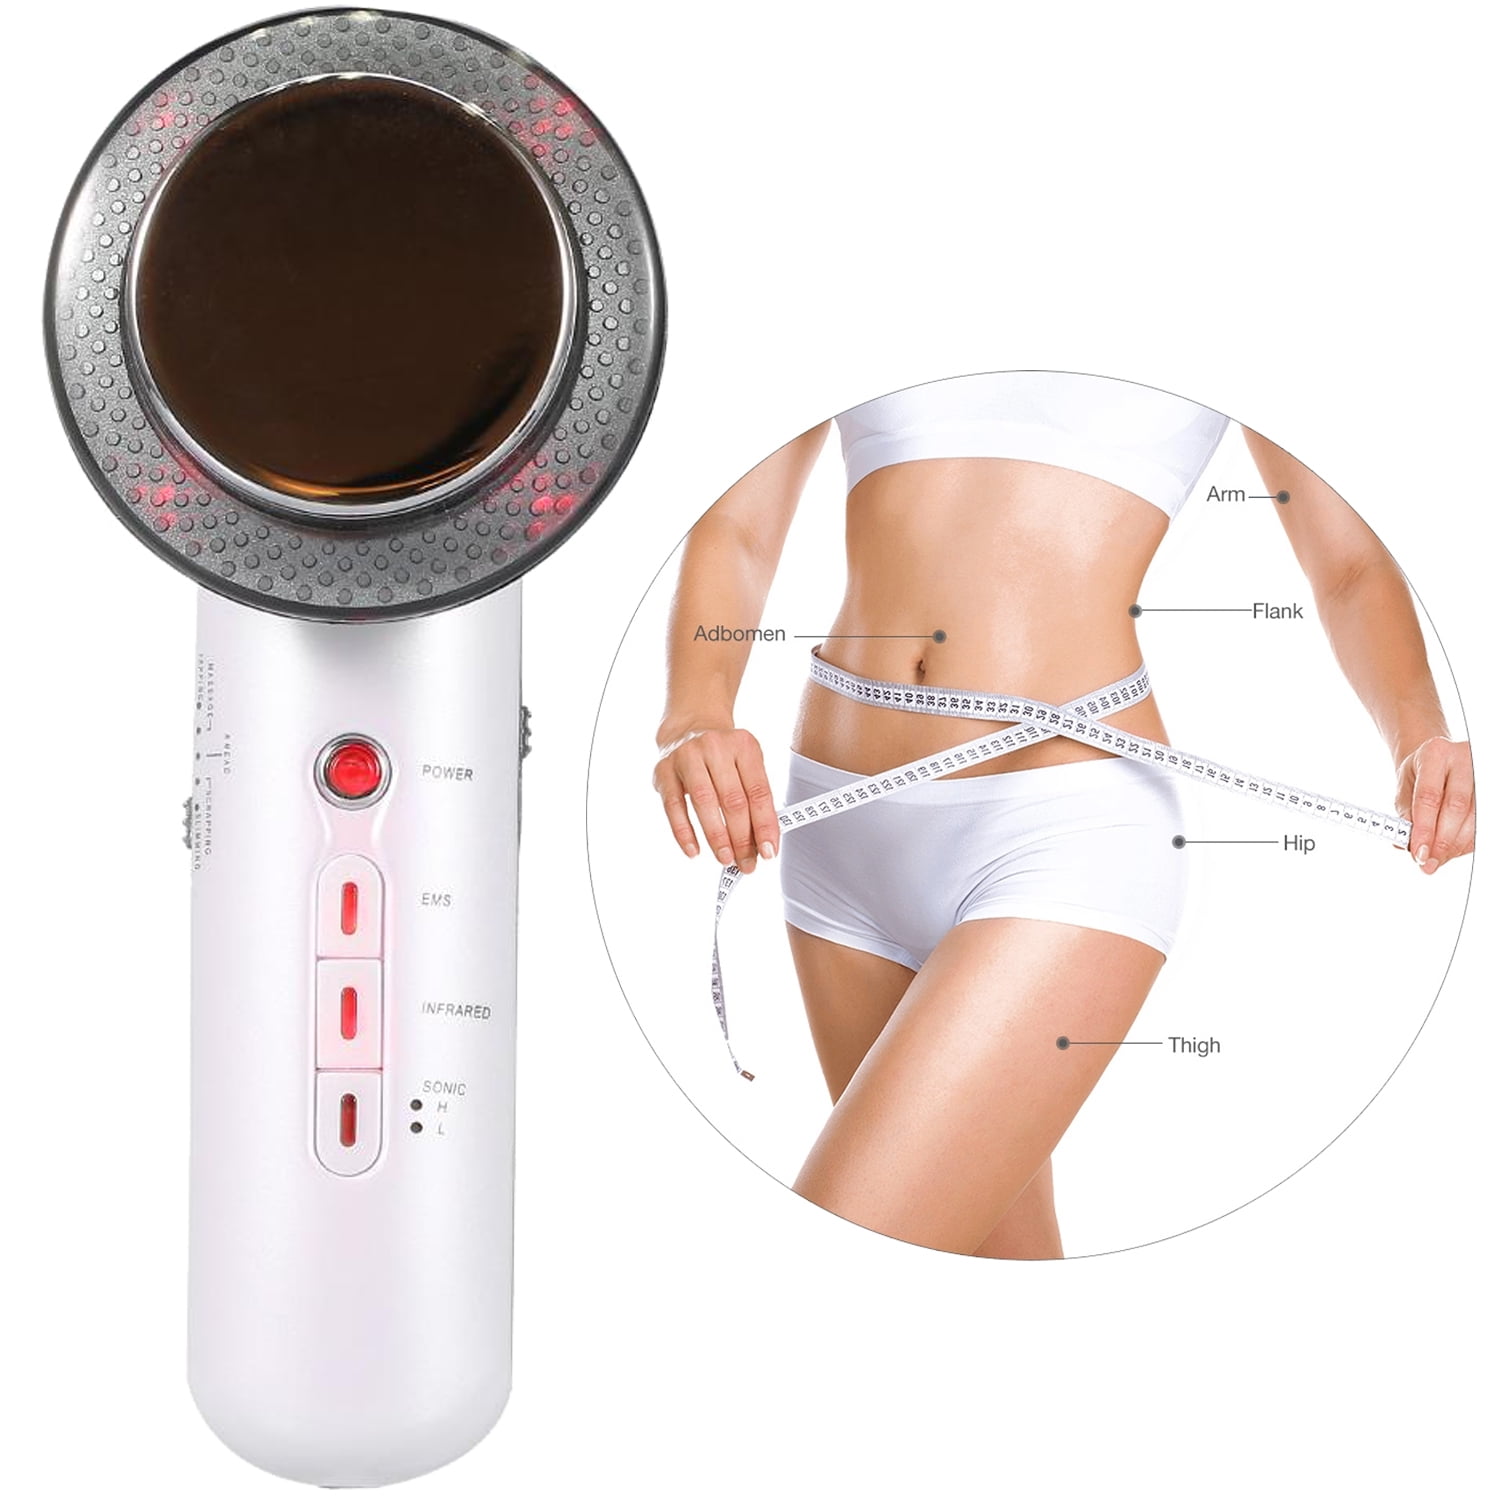 Details about   Home Slimming Machine Fat Throwing Machine Lose Weight LED Screen W/ Bluetooth 